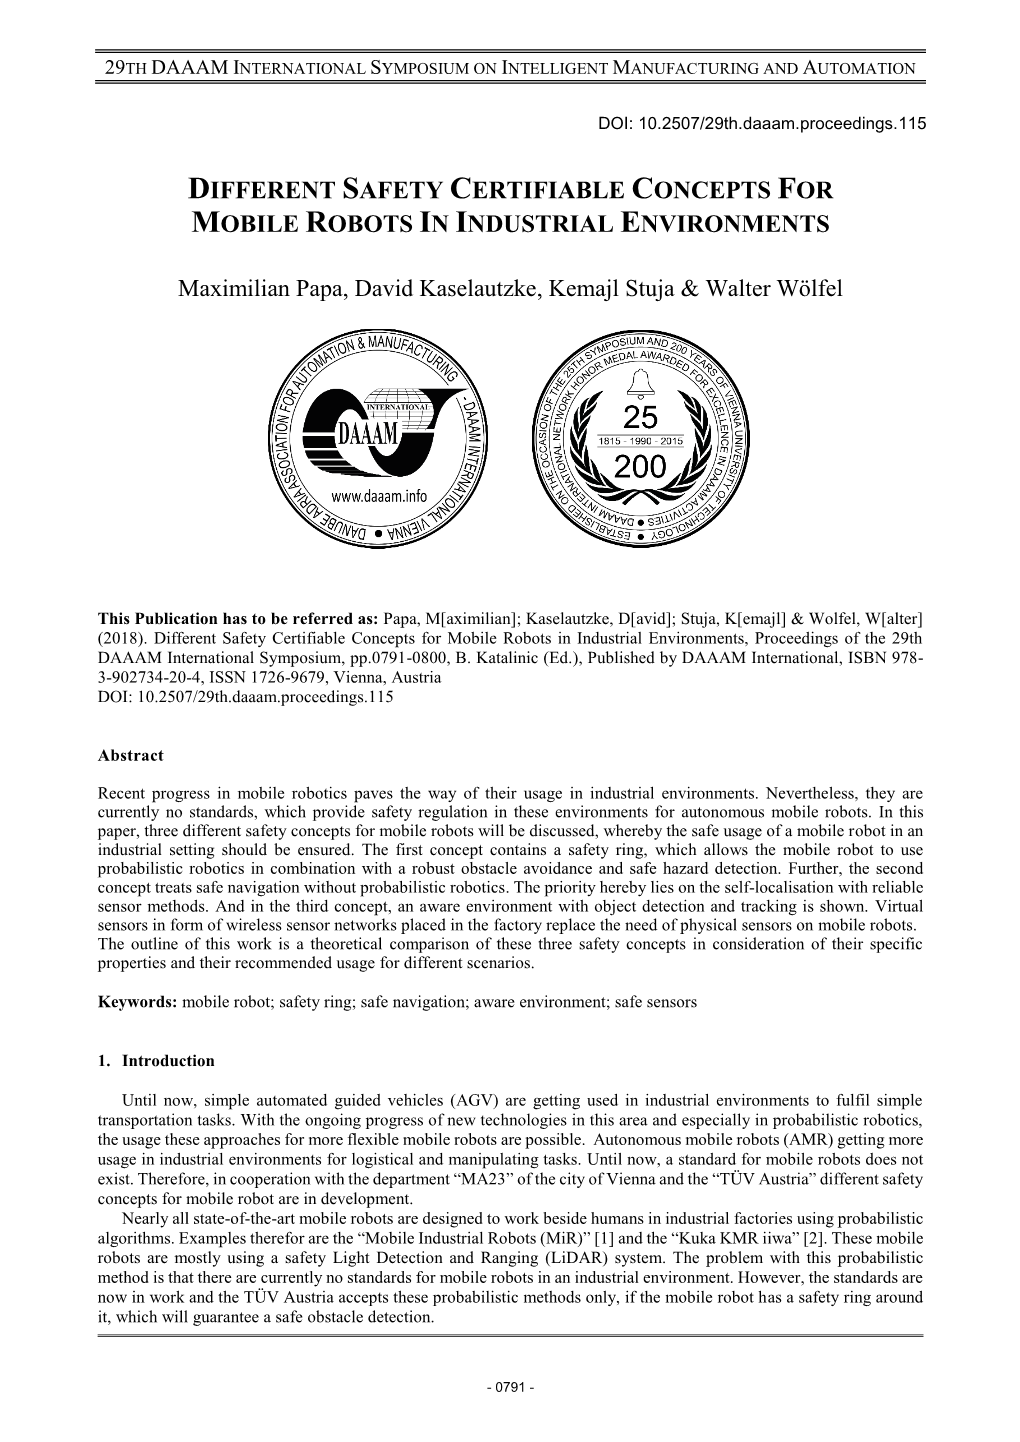 Different Safety Certifiable Concepts for Mobile Robots in Industrial Environments